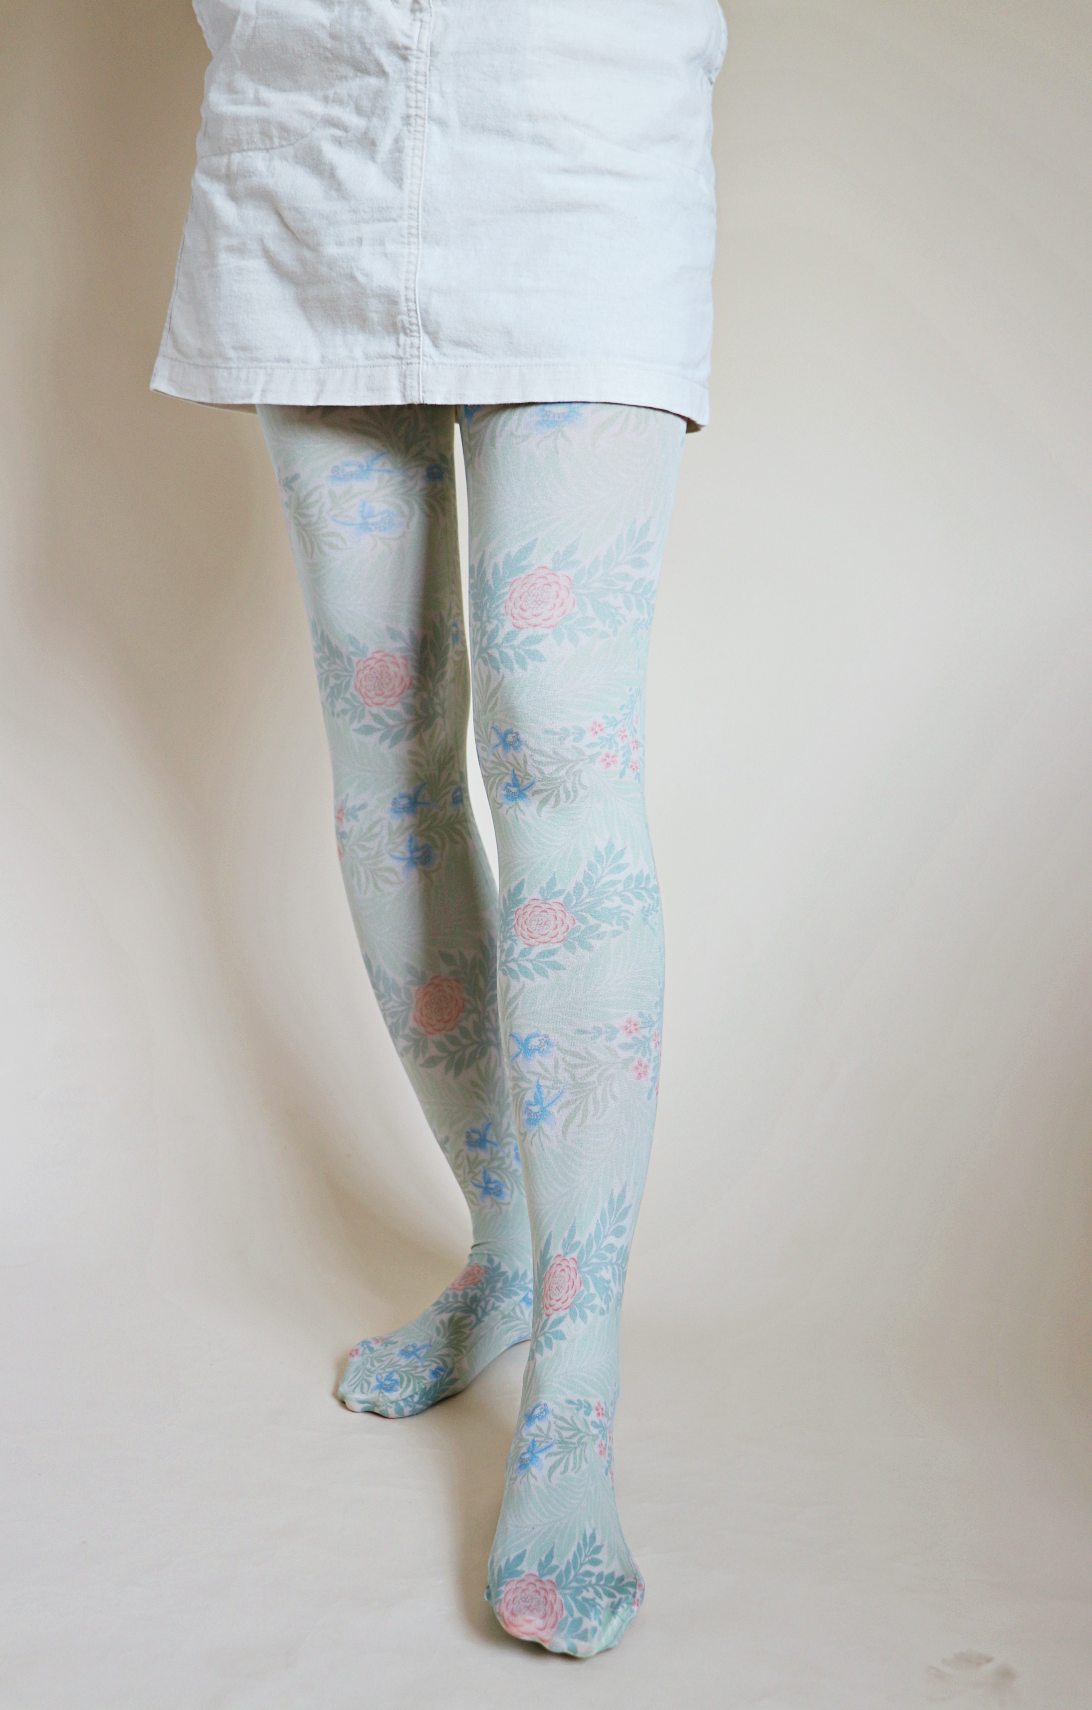 Printed Tights, Bird By William Morris